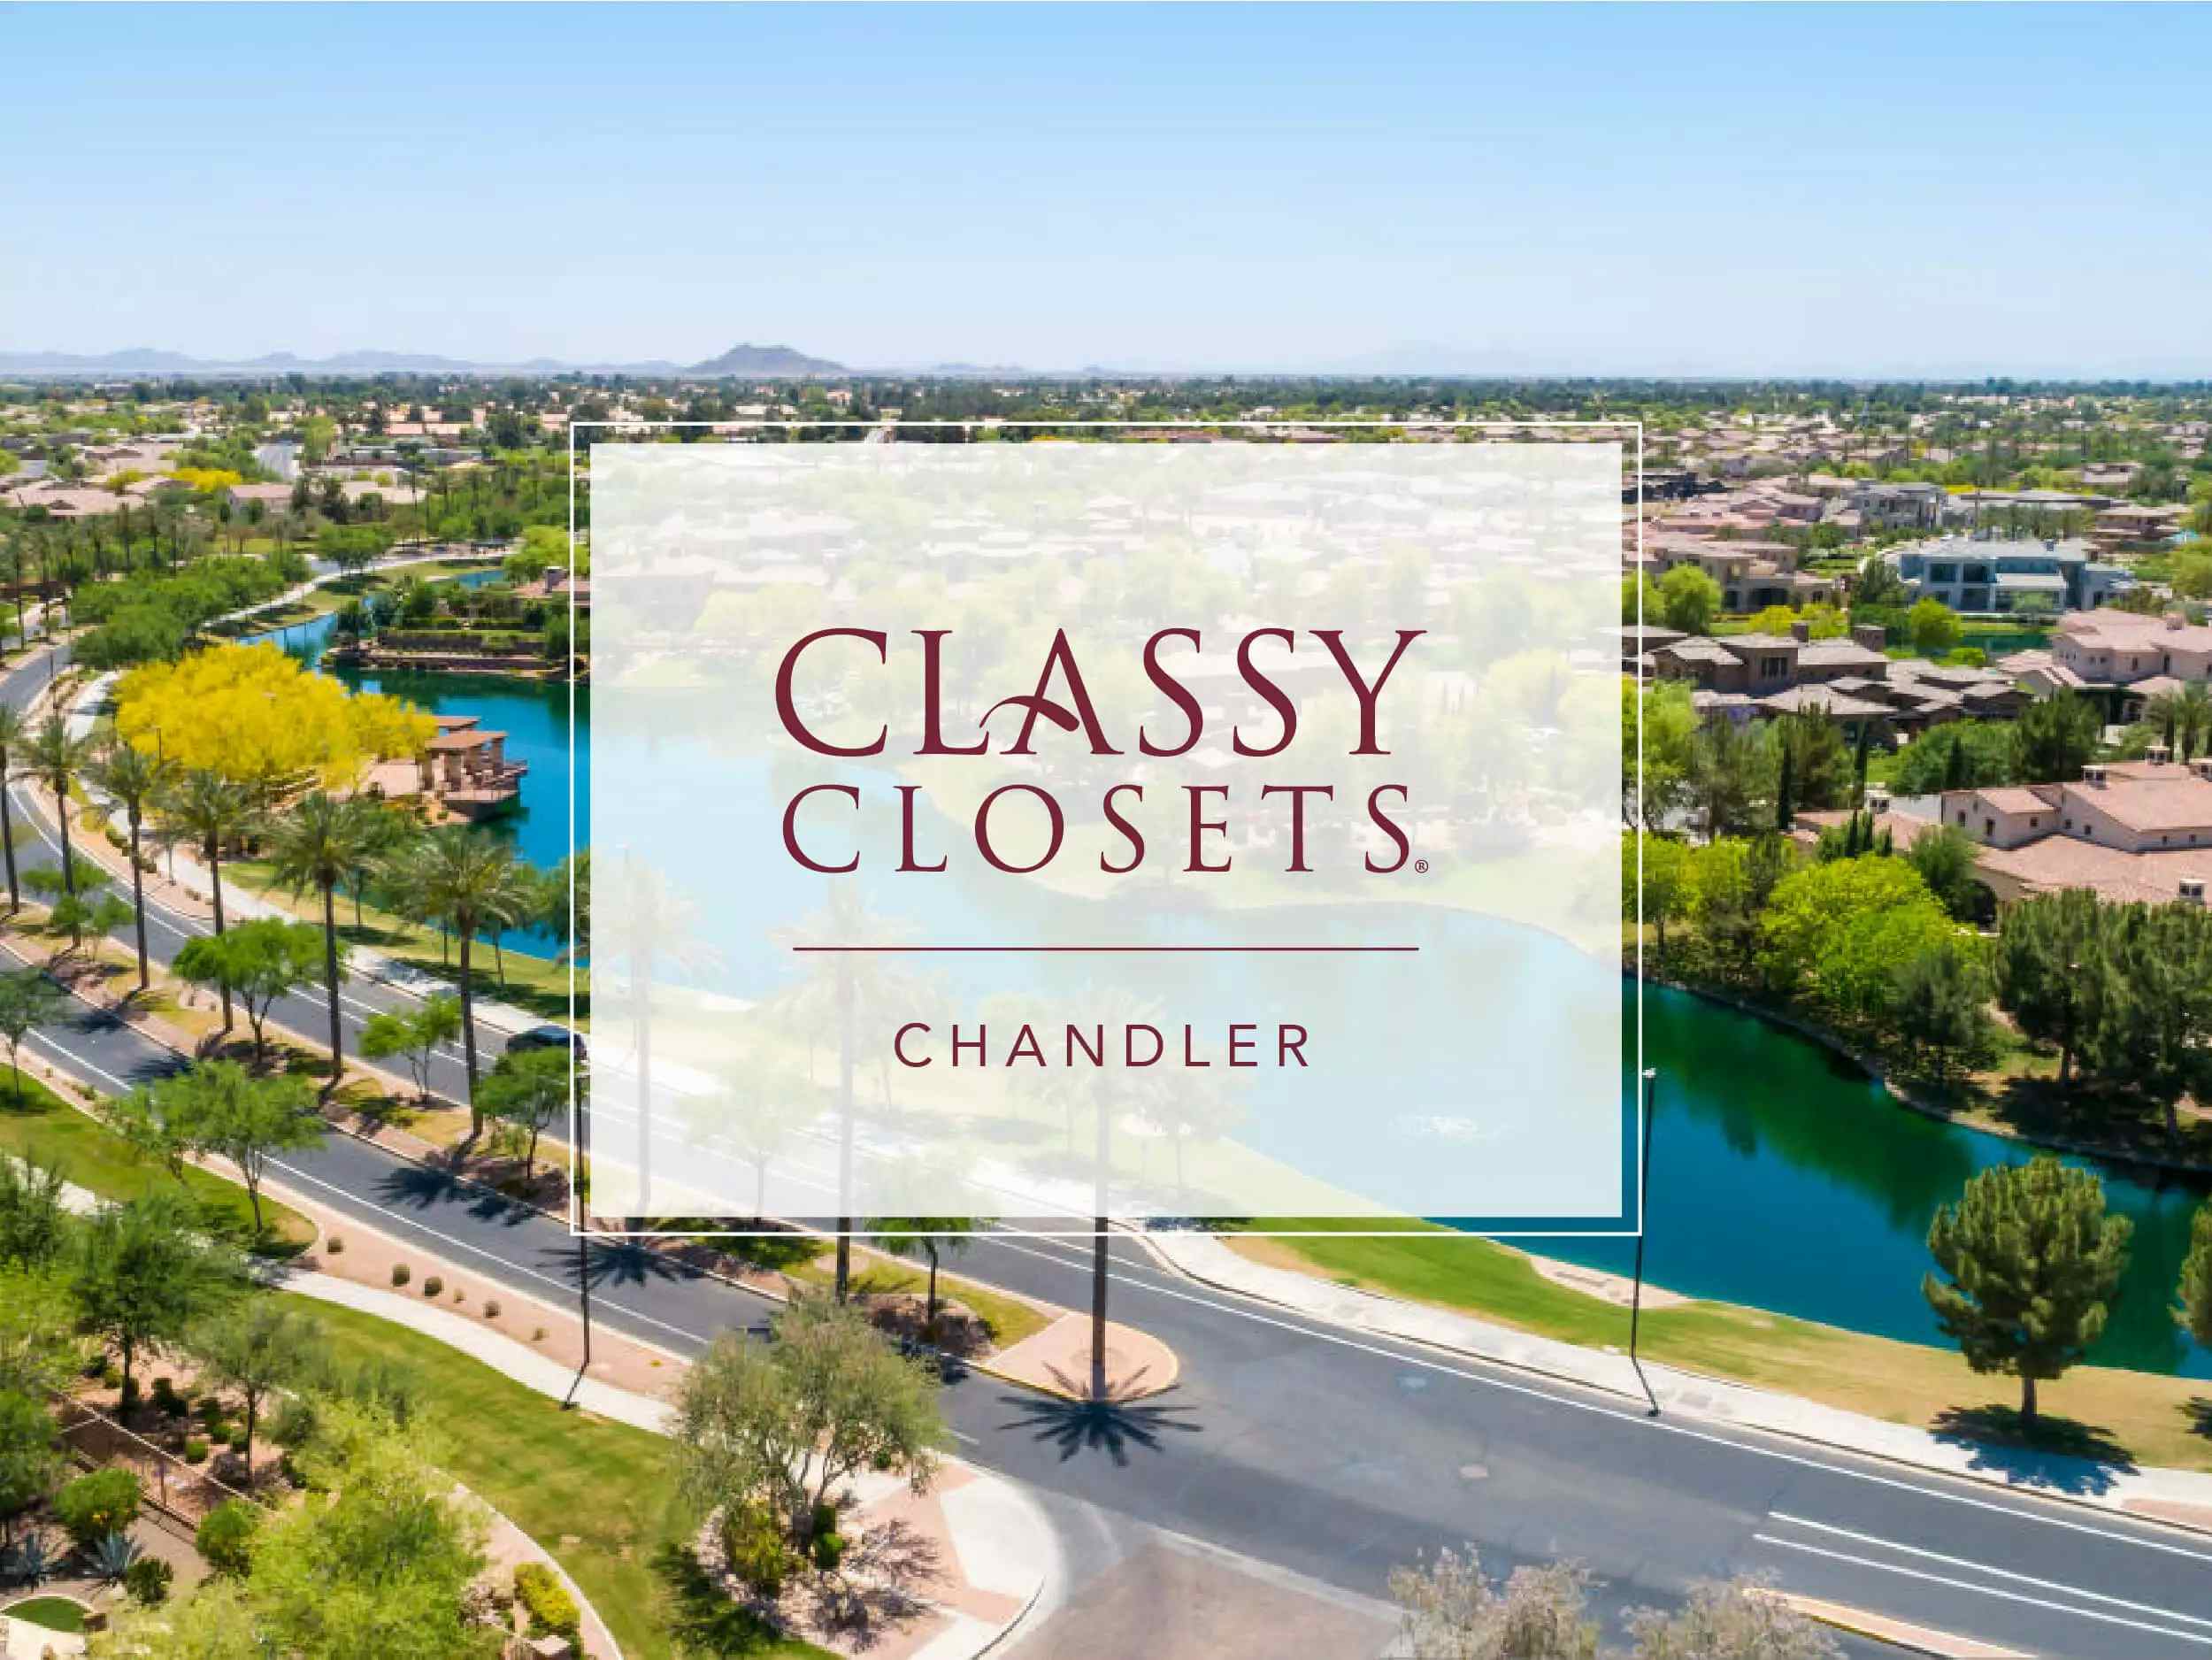 showroom on the location page-/images/locations/Chandler.webp